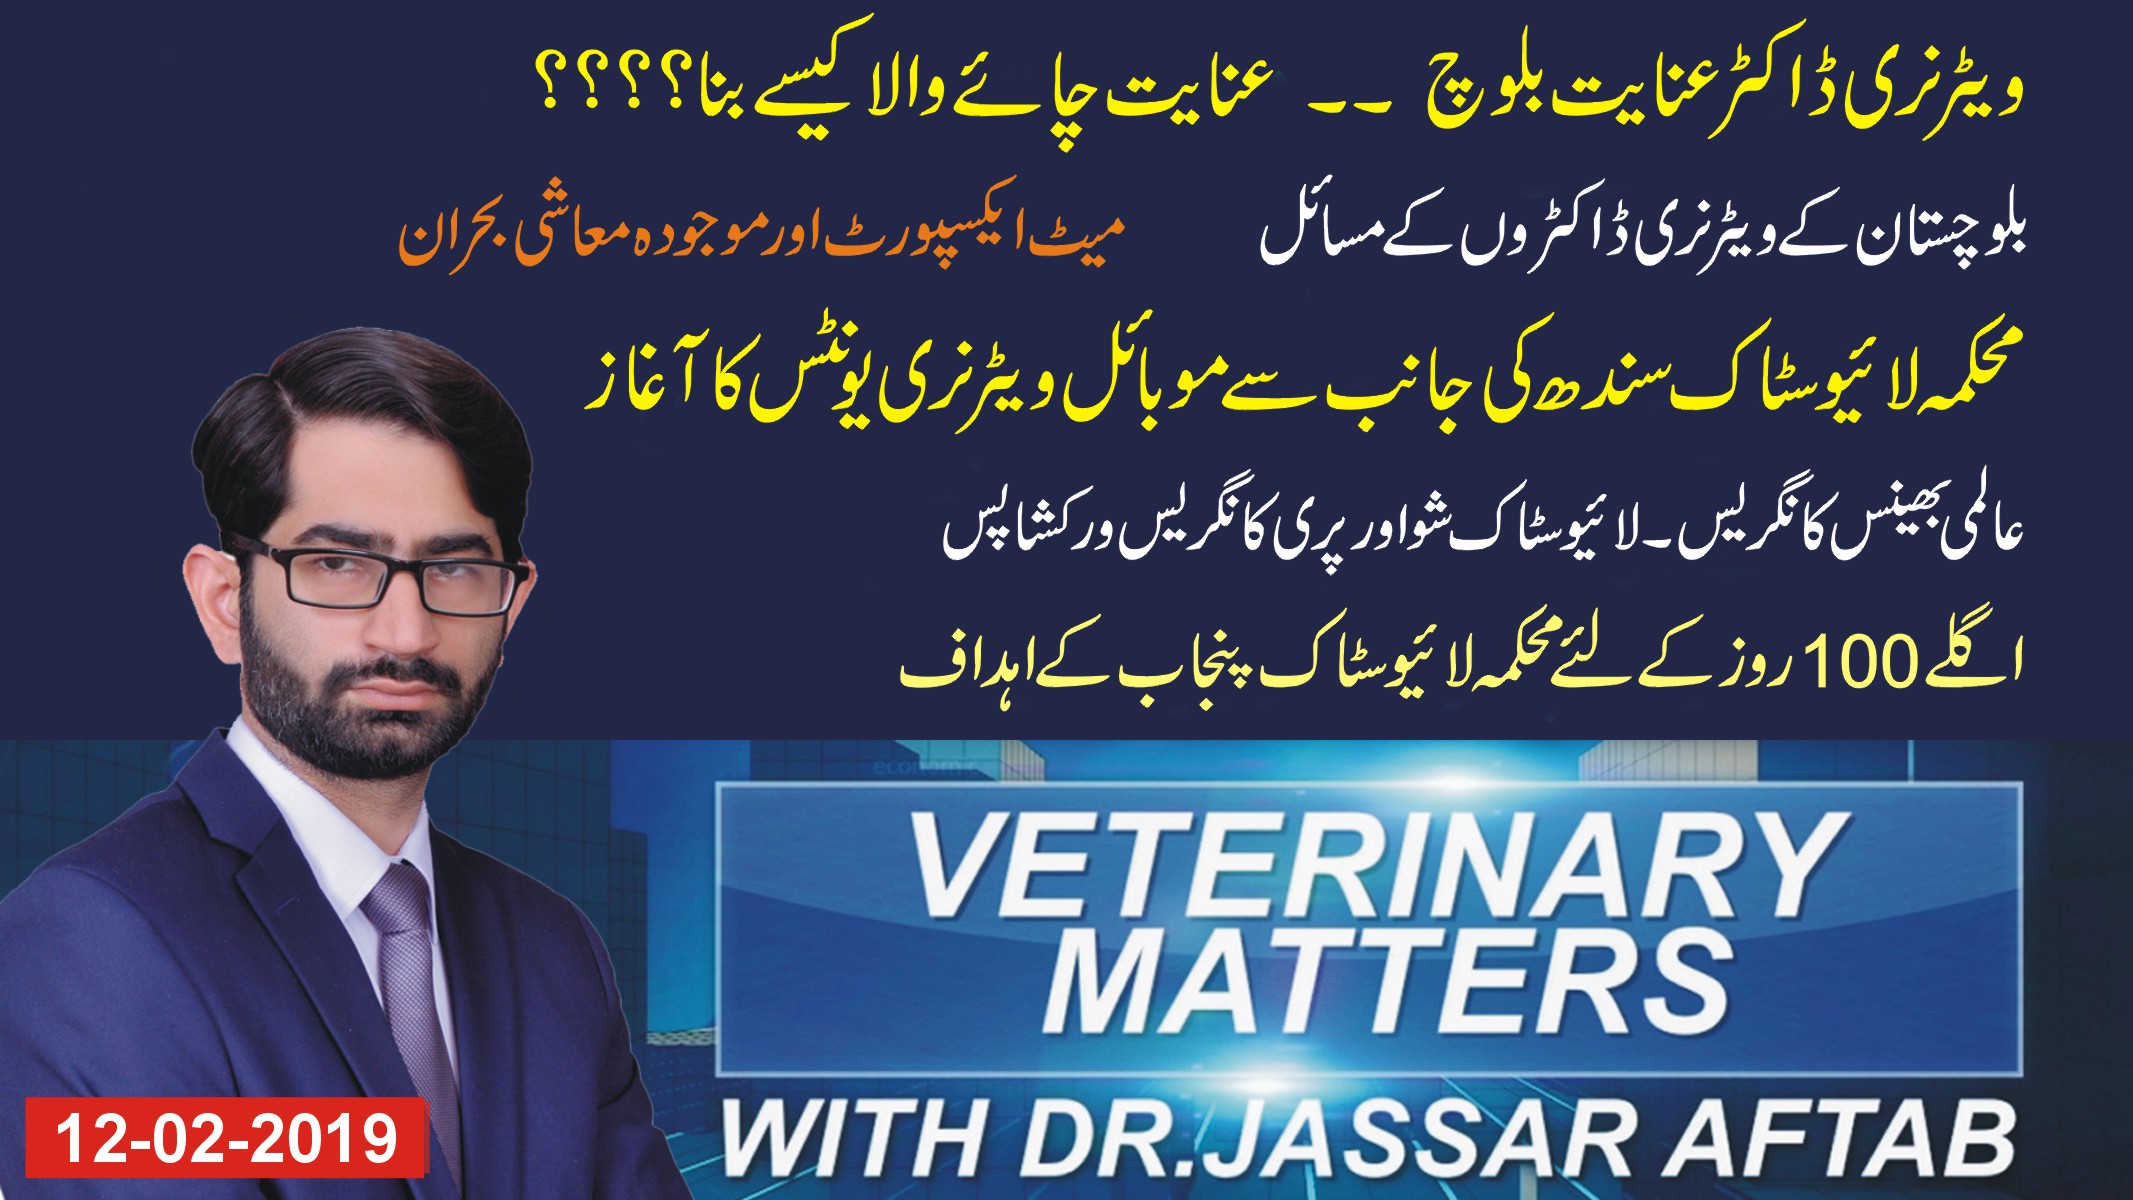 Veterinary Matters - Targets for Livestock for next 100 Days, Veterinary Unemployment Balochistan, MVDs in Sindh , issues of meat exports, Buffalo Congress,